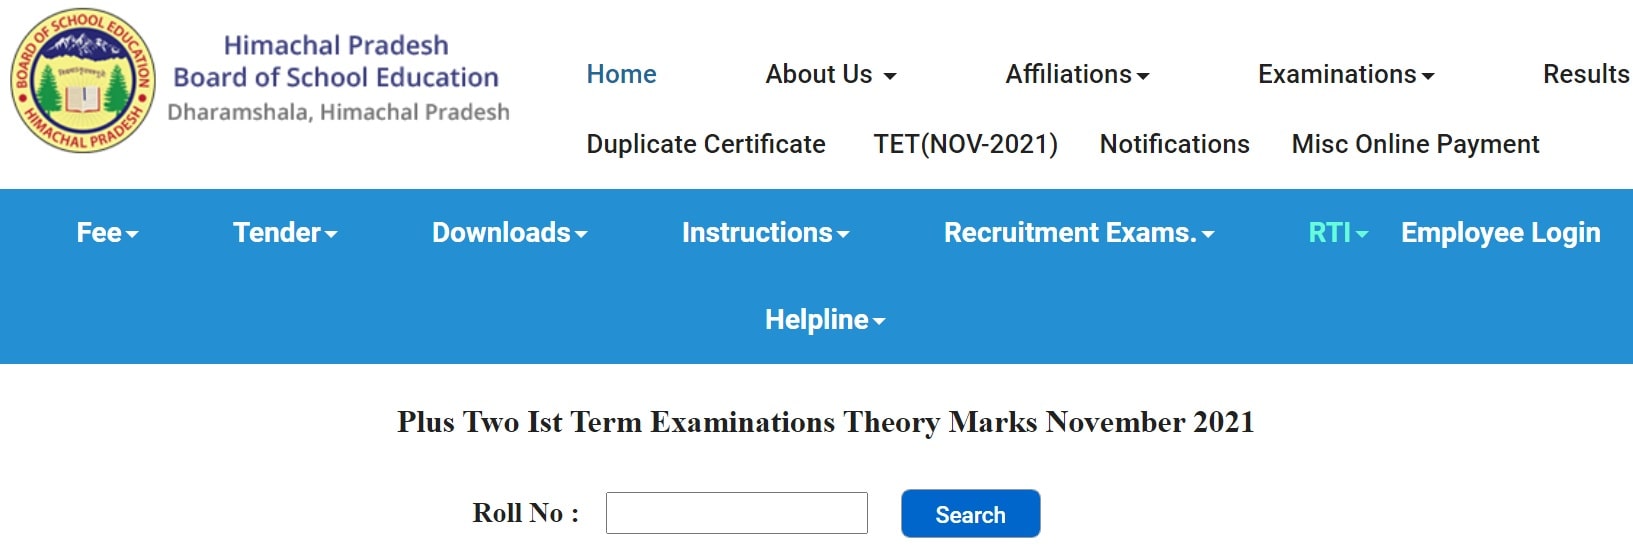 hpbose.org 12th Result 2022 Term 1